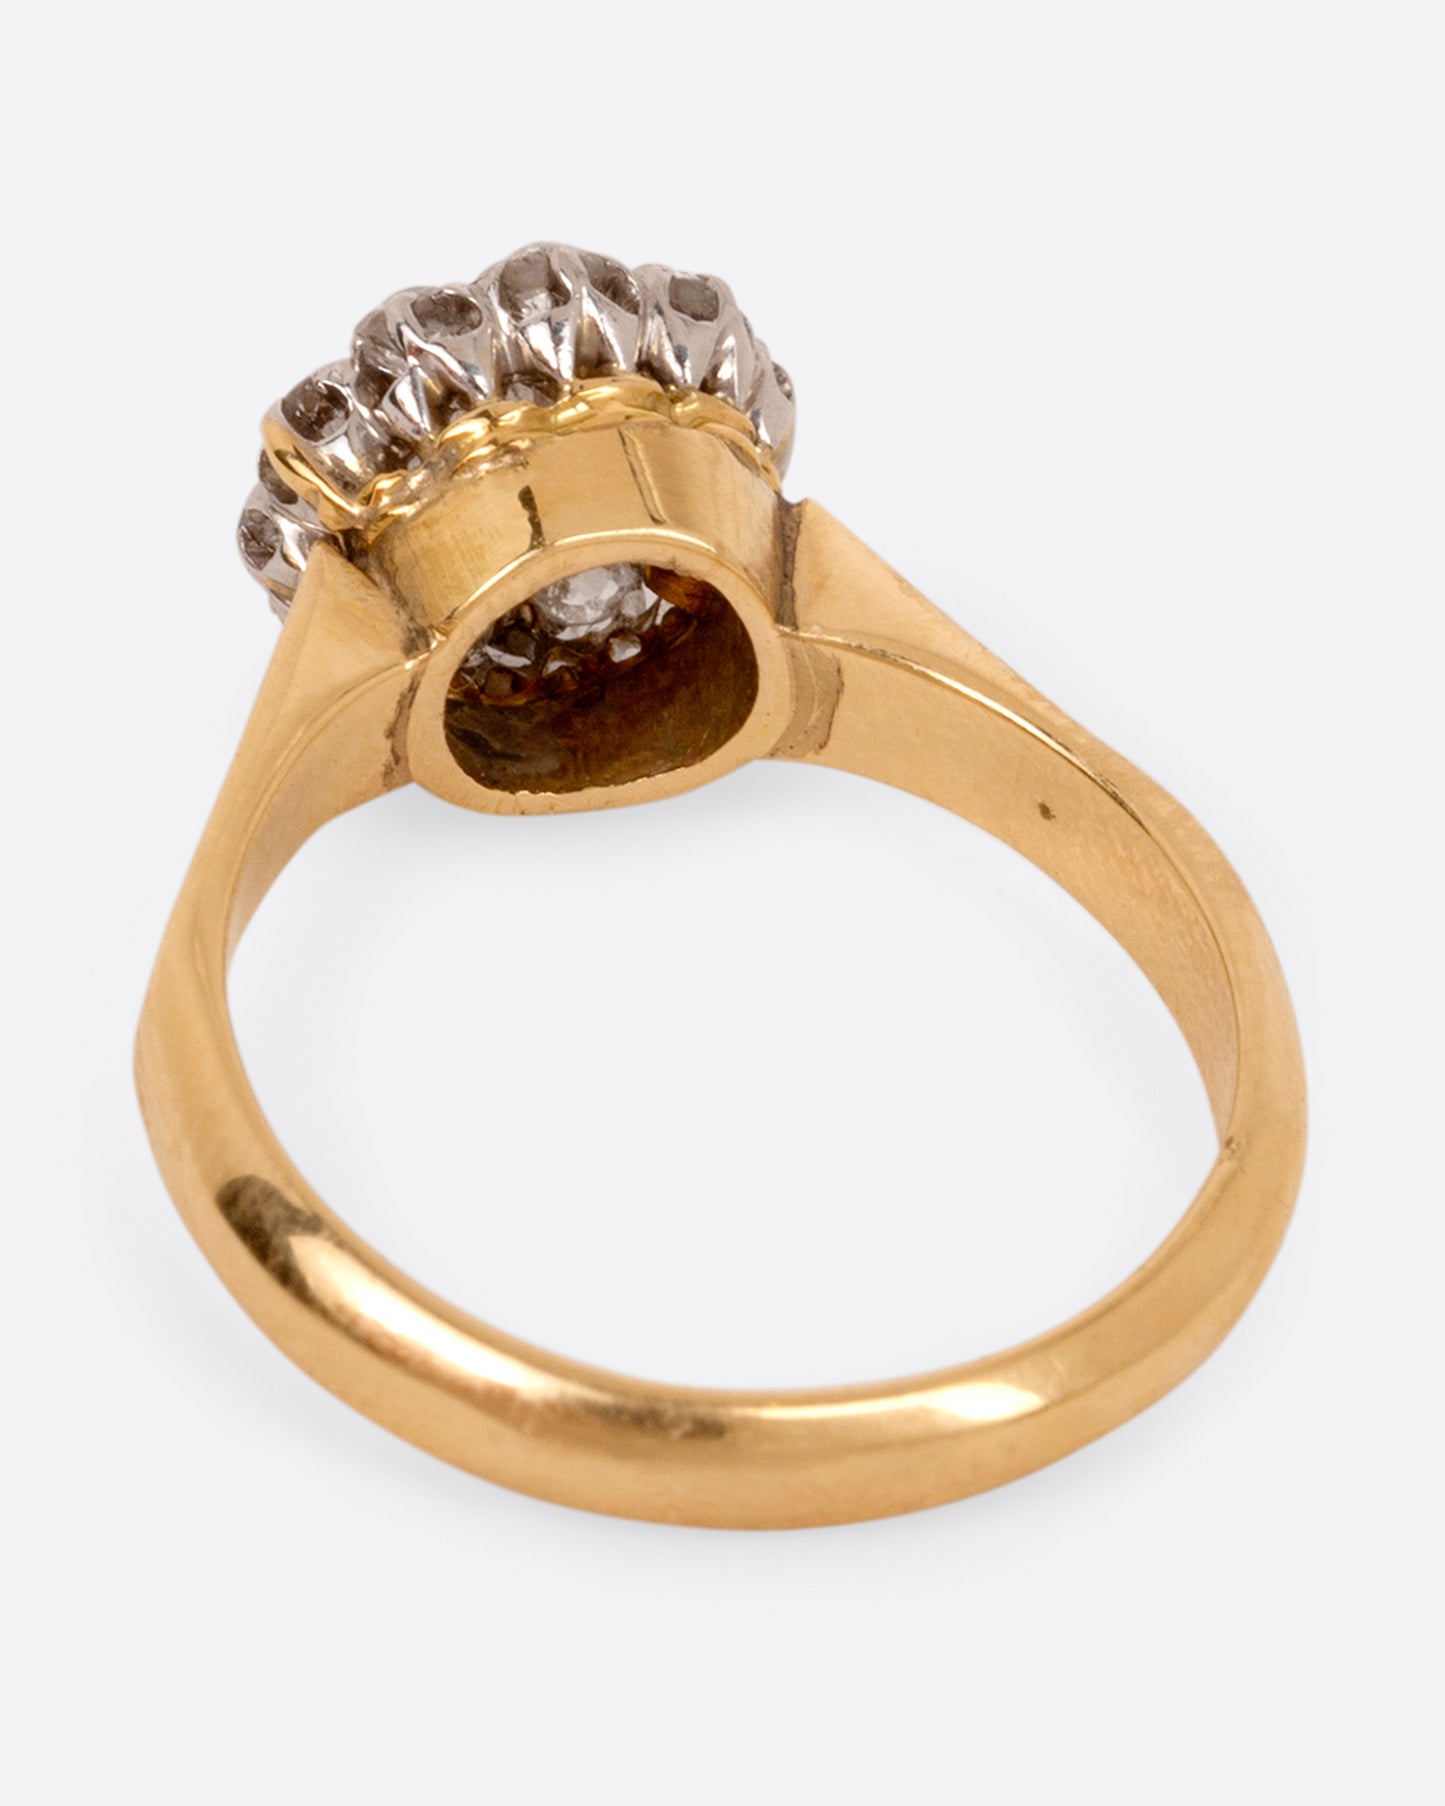 A wide flat yellow gold ring with a flower-shaped cluster of diamonds, shown from the back.